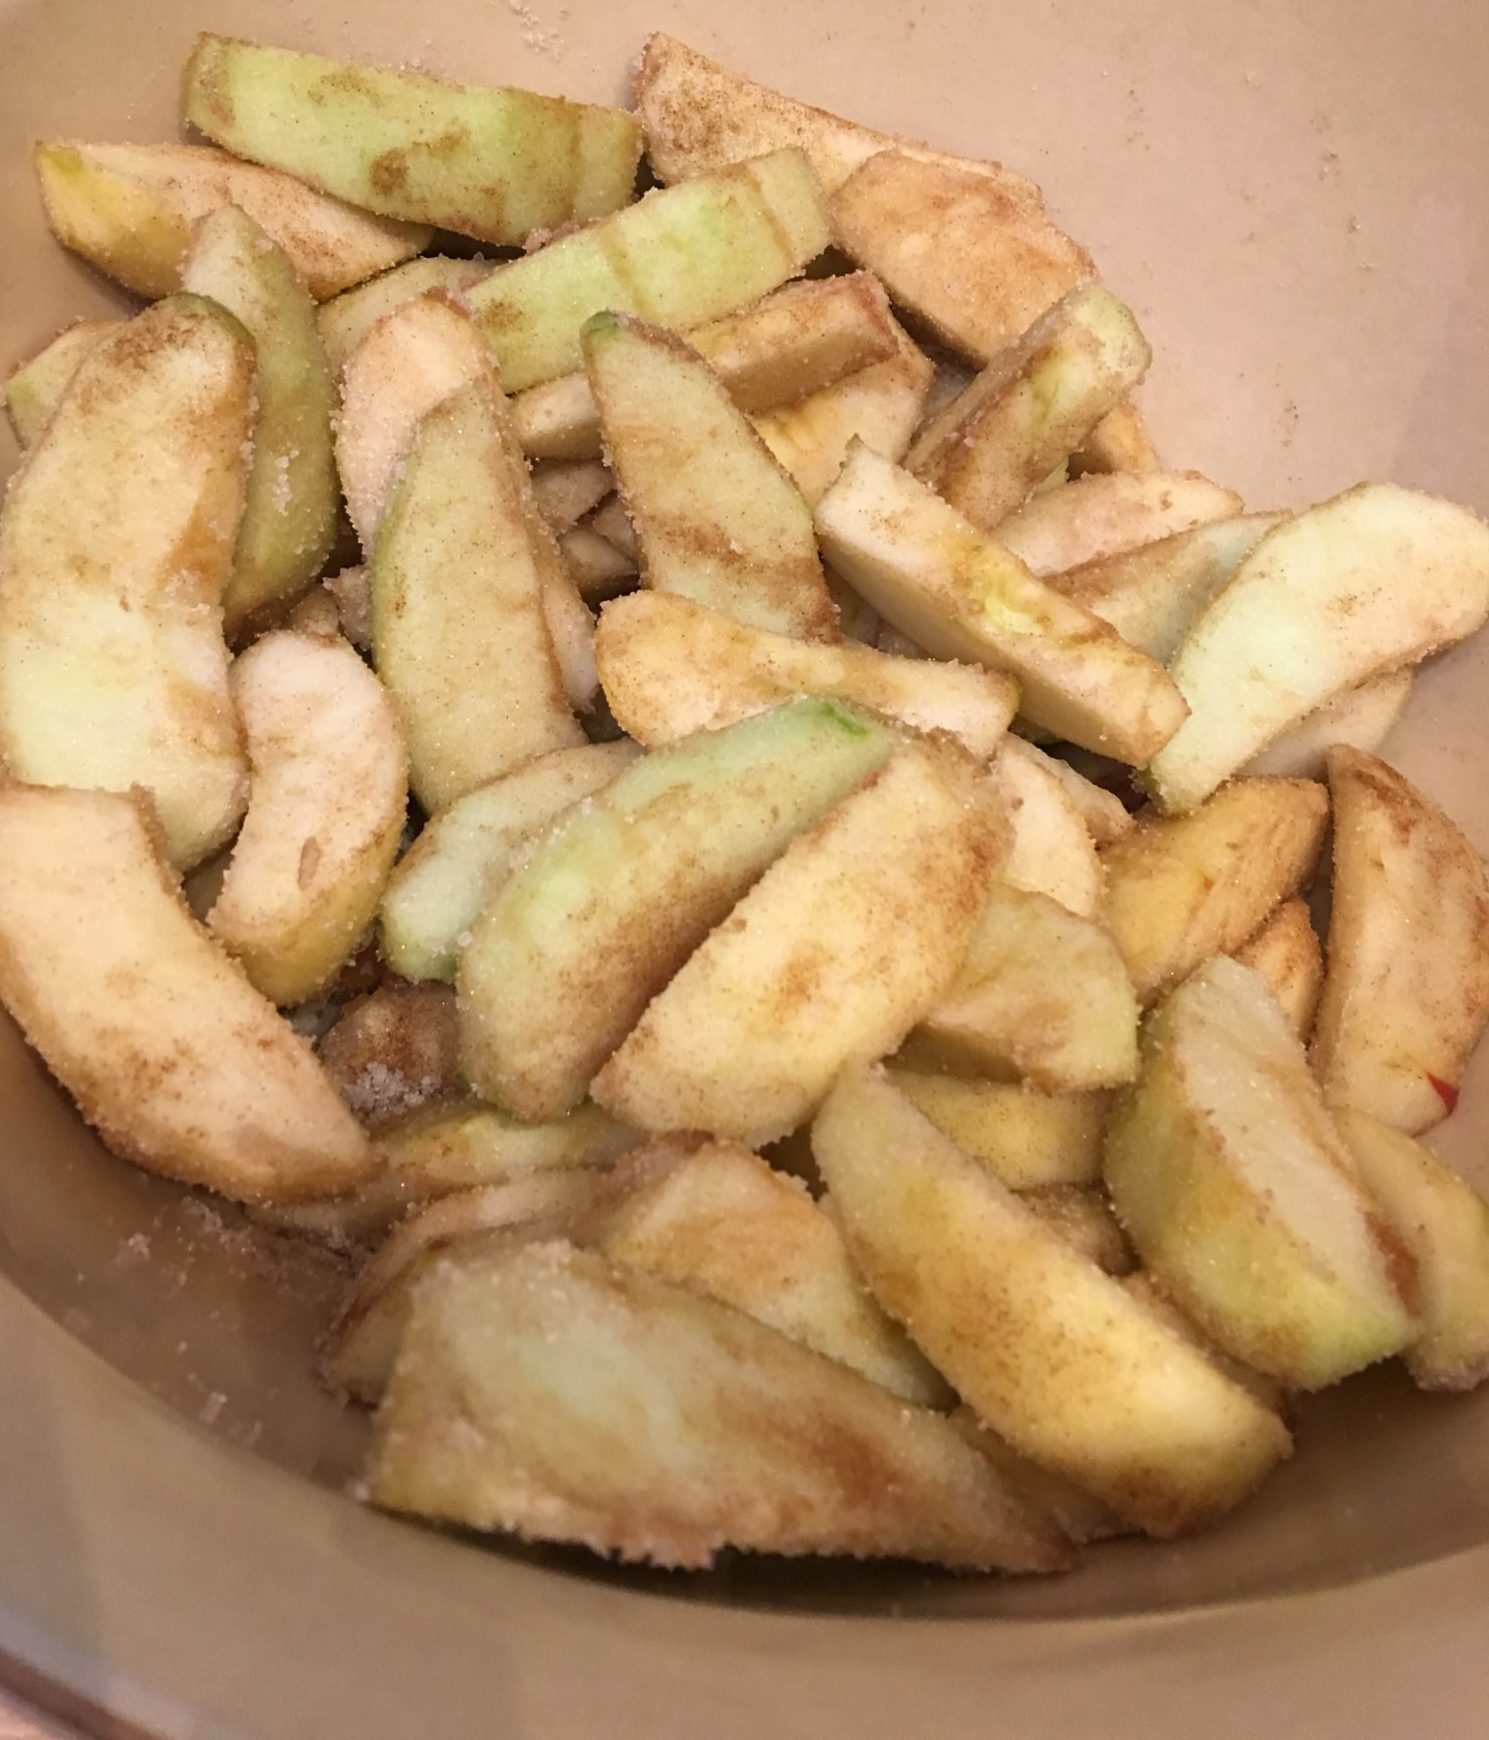 Apples in sugar and spices